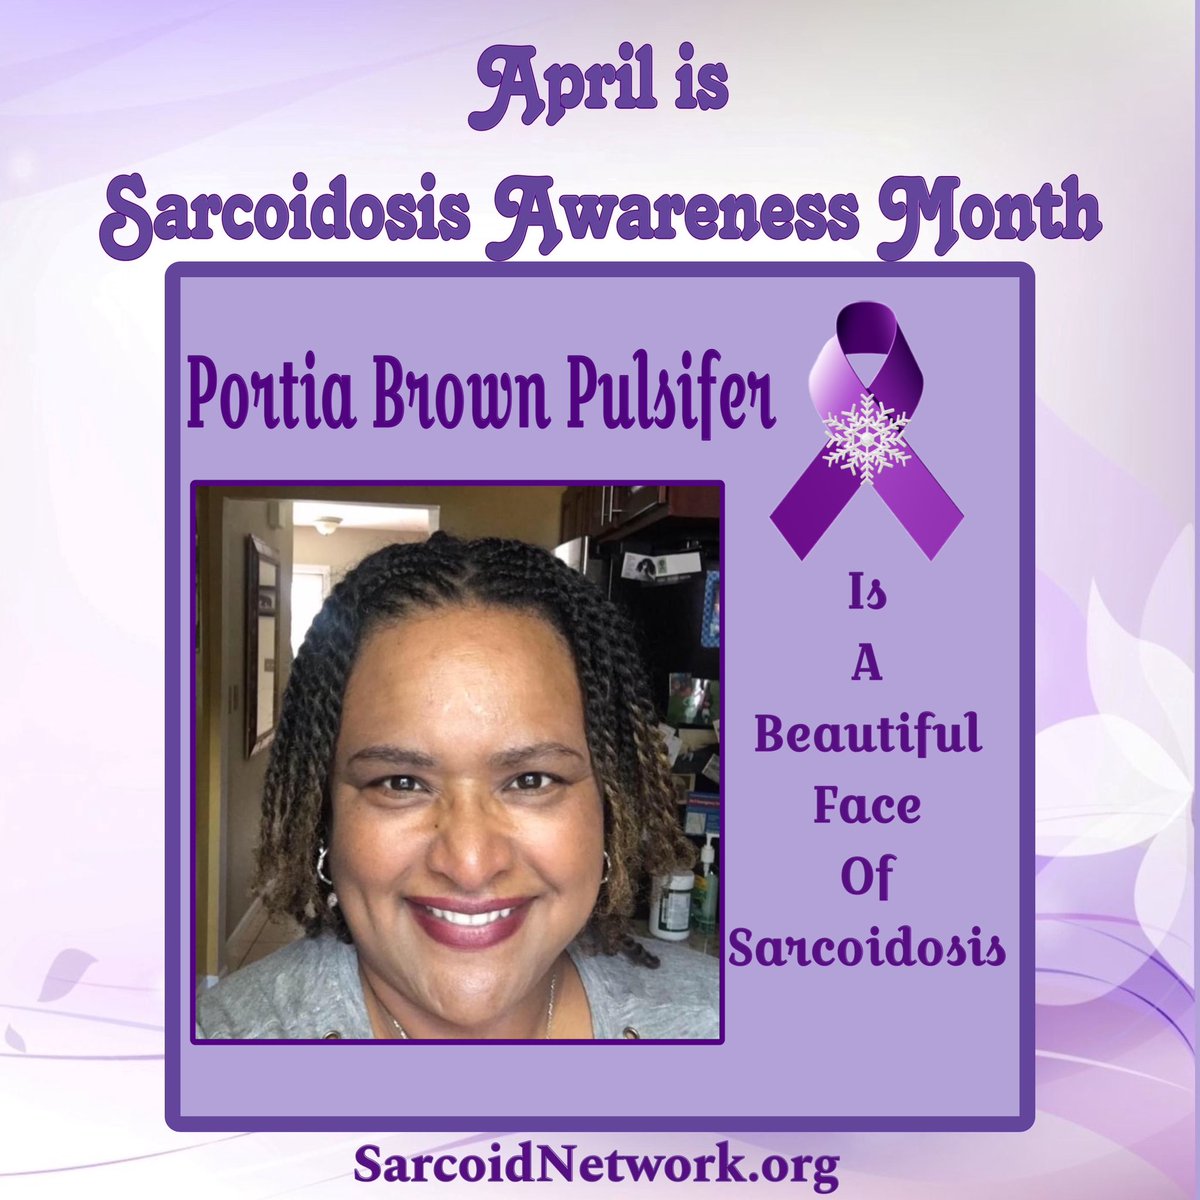 This is our Sarcoidosis Sister Portia Brown Pulsifer and she is a Beautiful Faces of Sarcoidosis!💜

#Sarcoidosis #raredisease #patientadvocate #sarcoidosisadvocate #beautifulfacesofsarcoidosis #sarcoidosisawarenessmonth